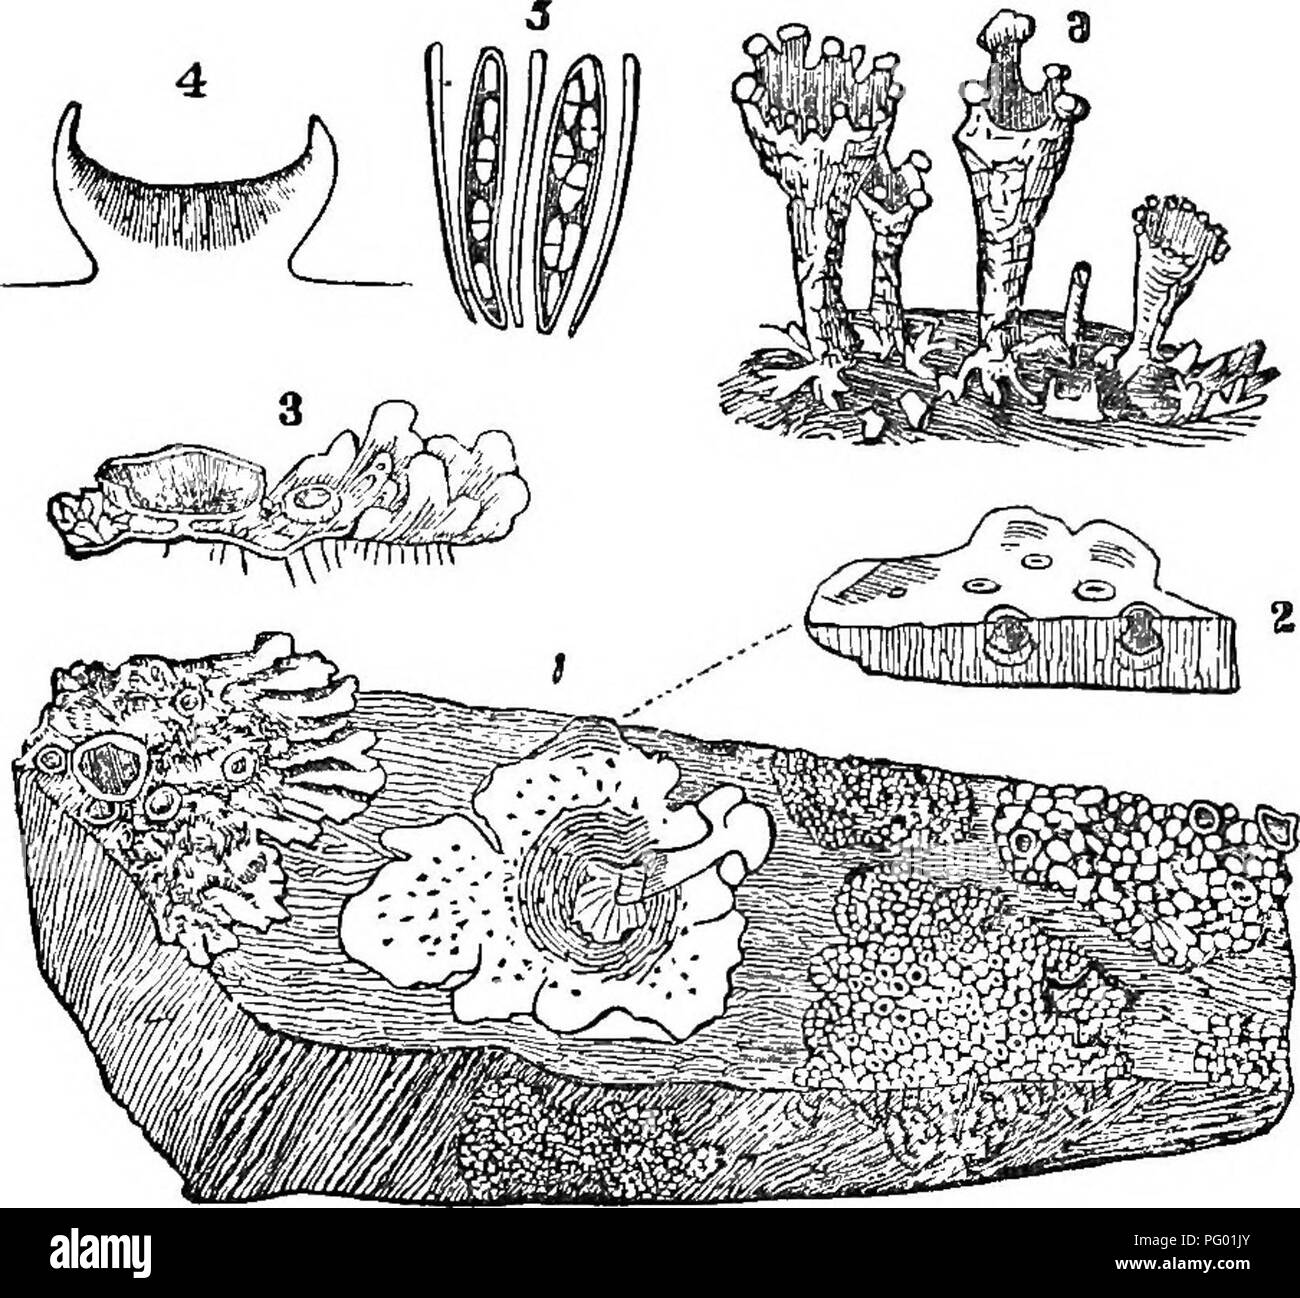 . The principles of botany, as exemplified in the Cryptogamia. For the use of schools and colleges. Cryptogams; Plant anatomy; 1853. 62 COMPOUND ORGANS OF PLANTS. their surface in the form of dark nuclei or spots; and on the left-hand margin we have a foliaceous lichen, Parmelia con- Fig. 27.. spersa, with its fructification in shields or cups, the cortical matter of the thallus forming a rim or border round the nucleus; 3 is a piece of the thallus of Parmelia oonspersa with a section through the apothecium; 4 is a magnified section of an apotheoium, showing the young asci or sacs which contai Stock Photo